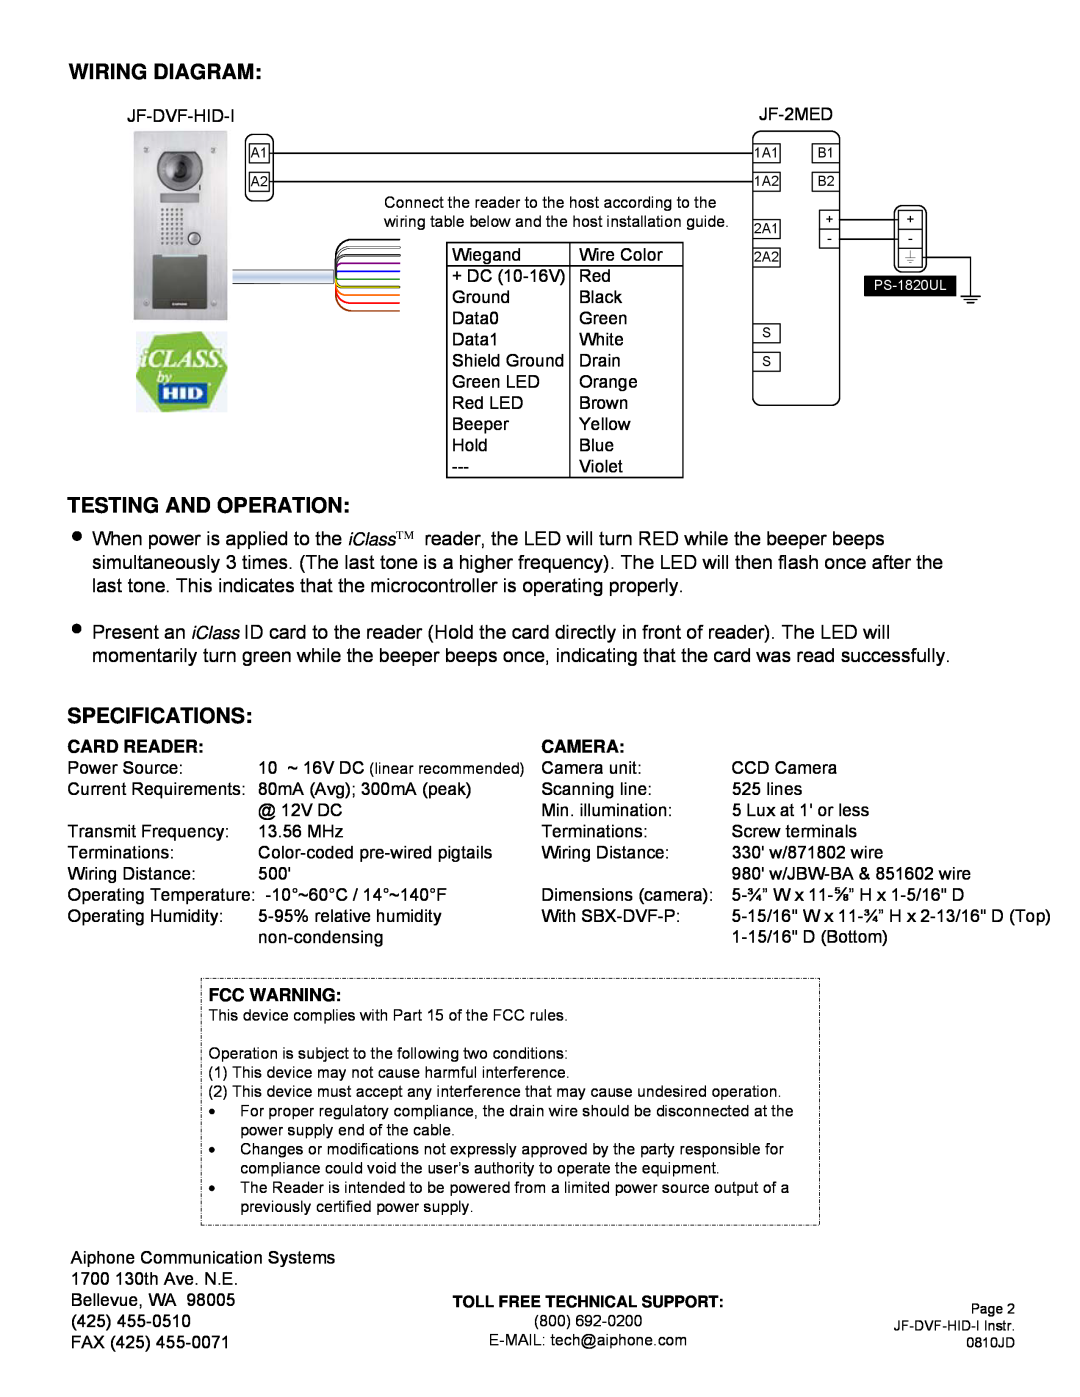 Aiphone JF-DVF-HID-I dimensions Wiring Diagram, Testing And Operation, Specifications, Card Reader, Camera, Fcc Warning 